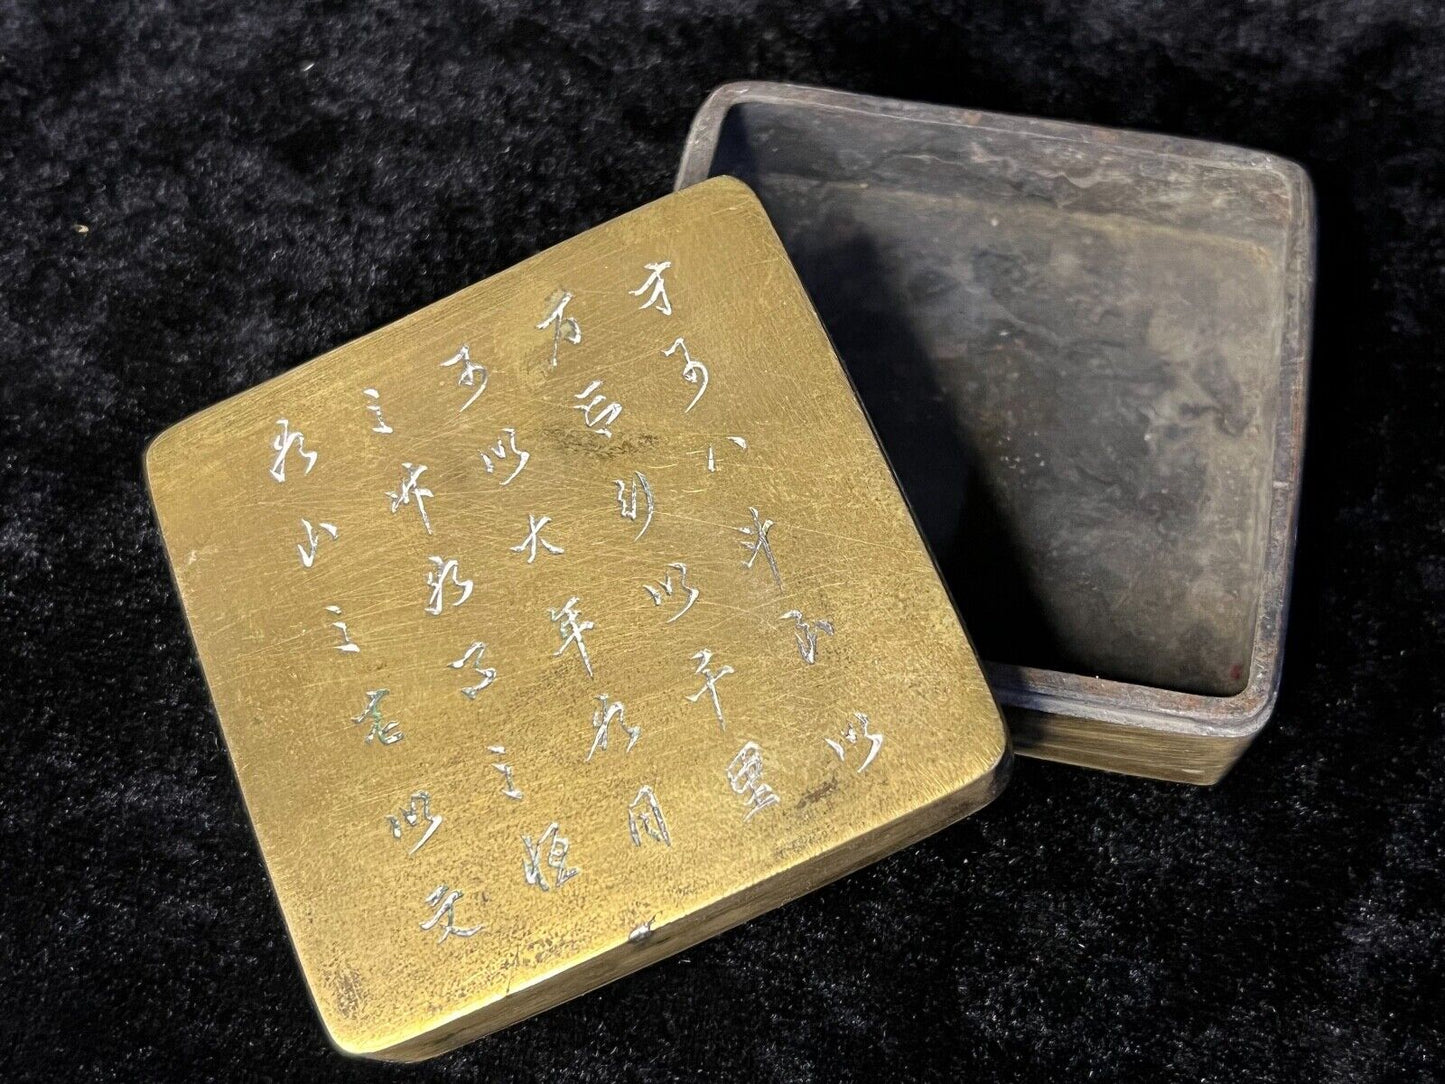 Chinese Ink Cake Box W/ Calligraphy Poem Brass / Copper / Paktong 2.5"